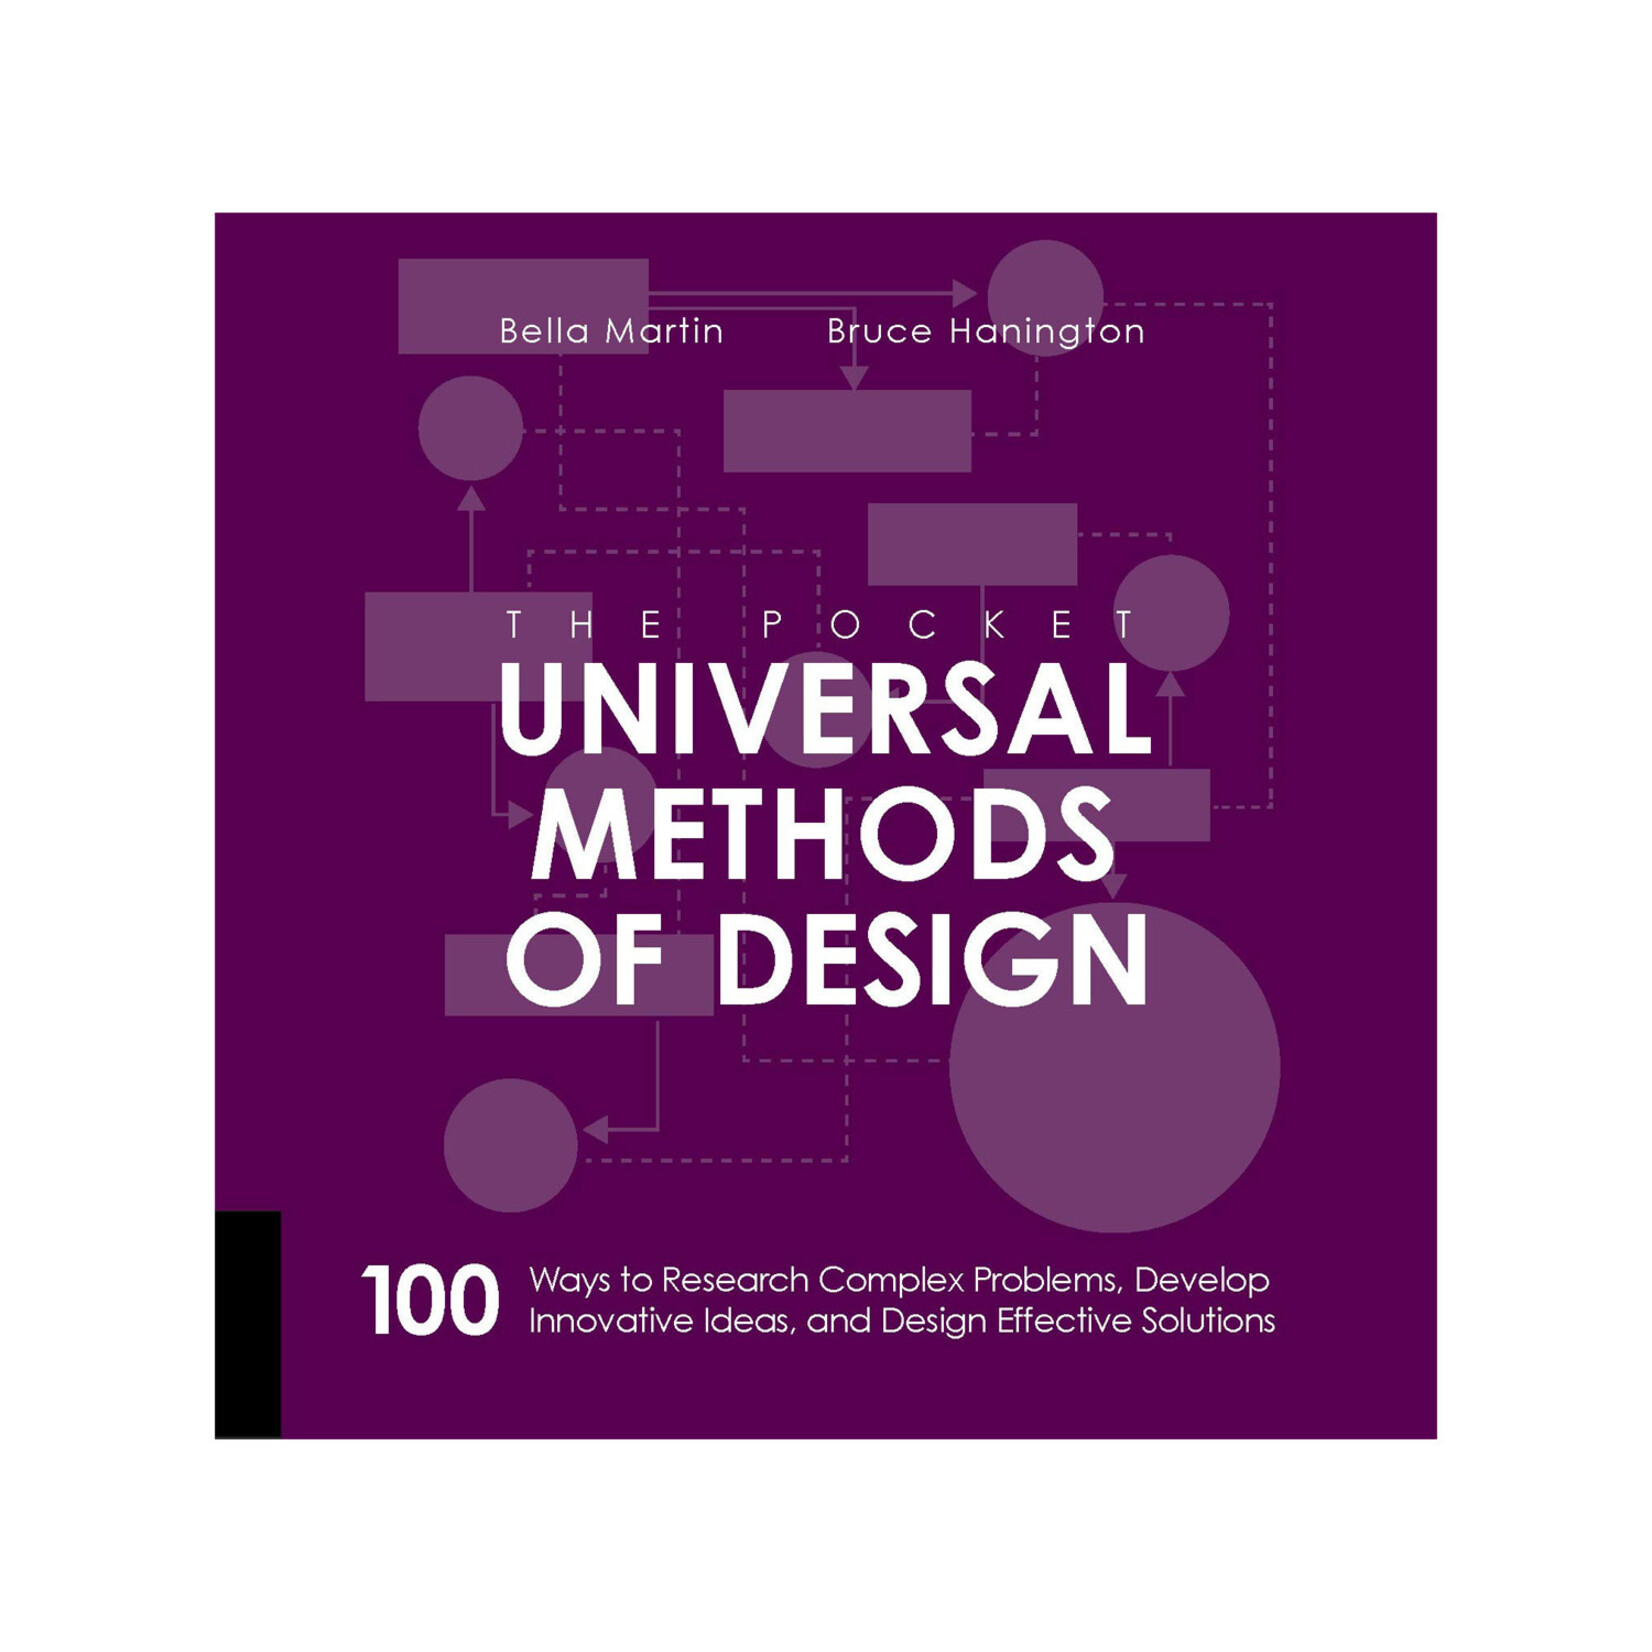 Pocket Universal Methods of Design: 100 Ways to Research Complex Problems, Develop Innovative Ideas and Design Effective Solutions